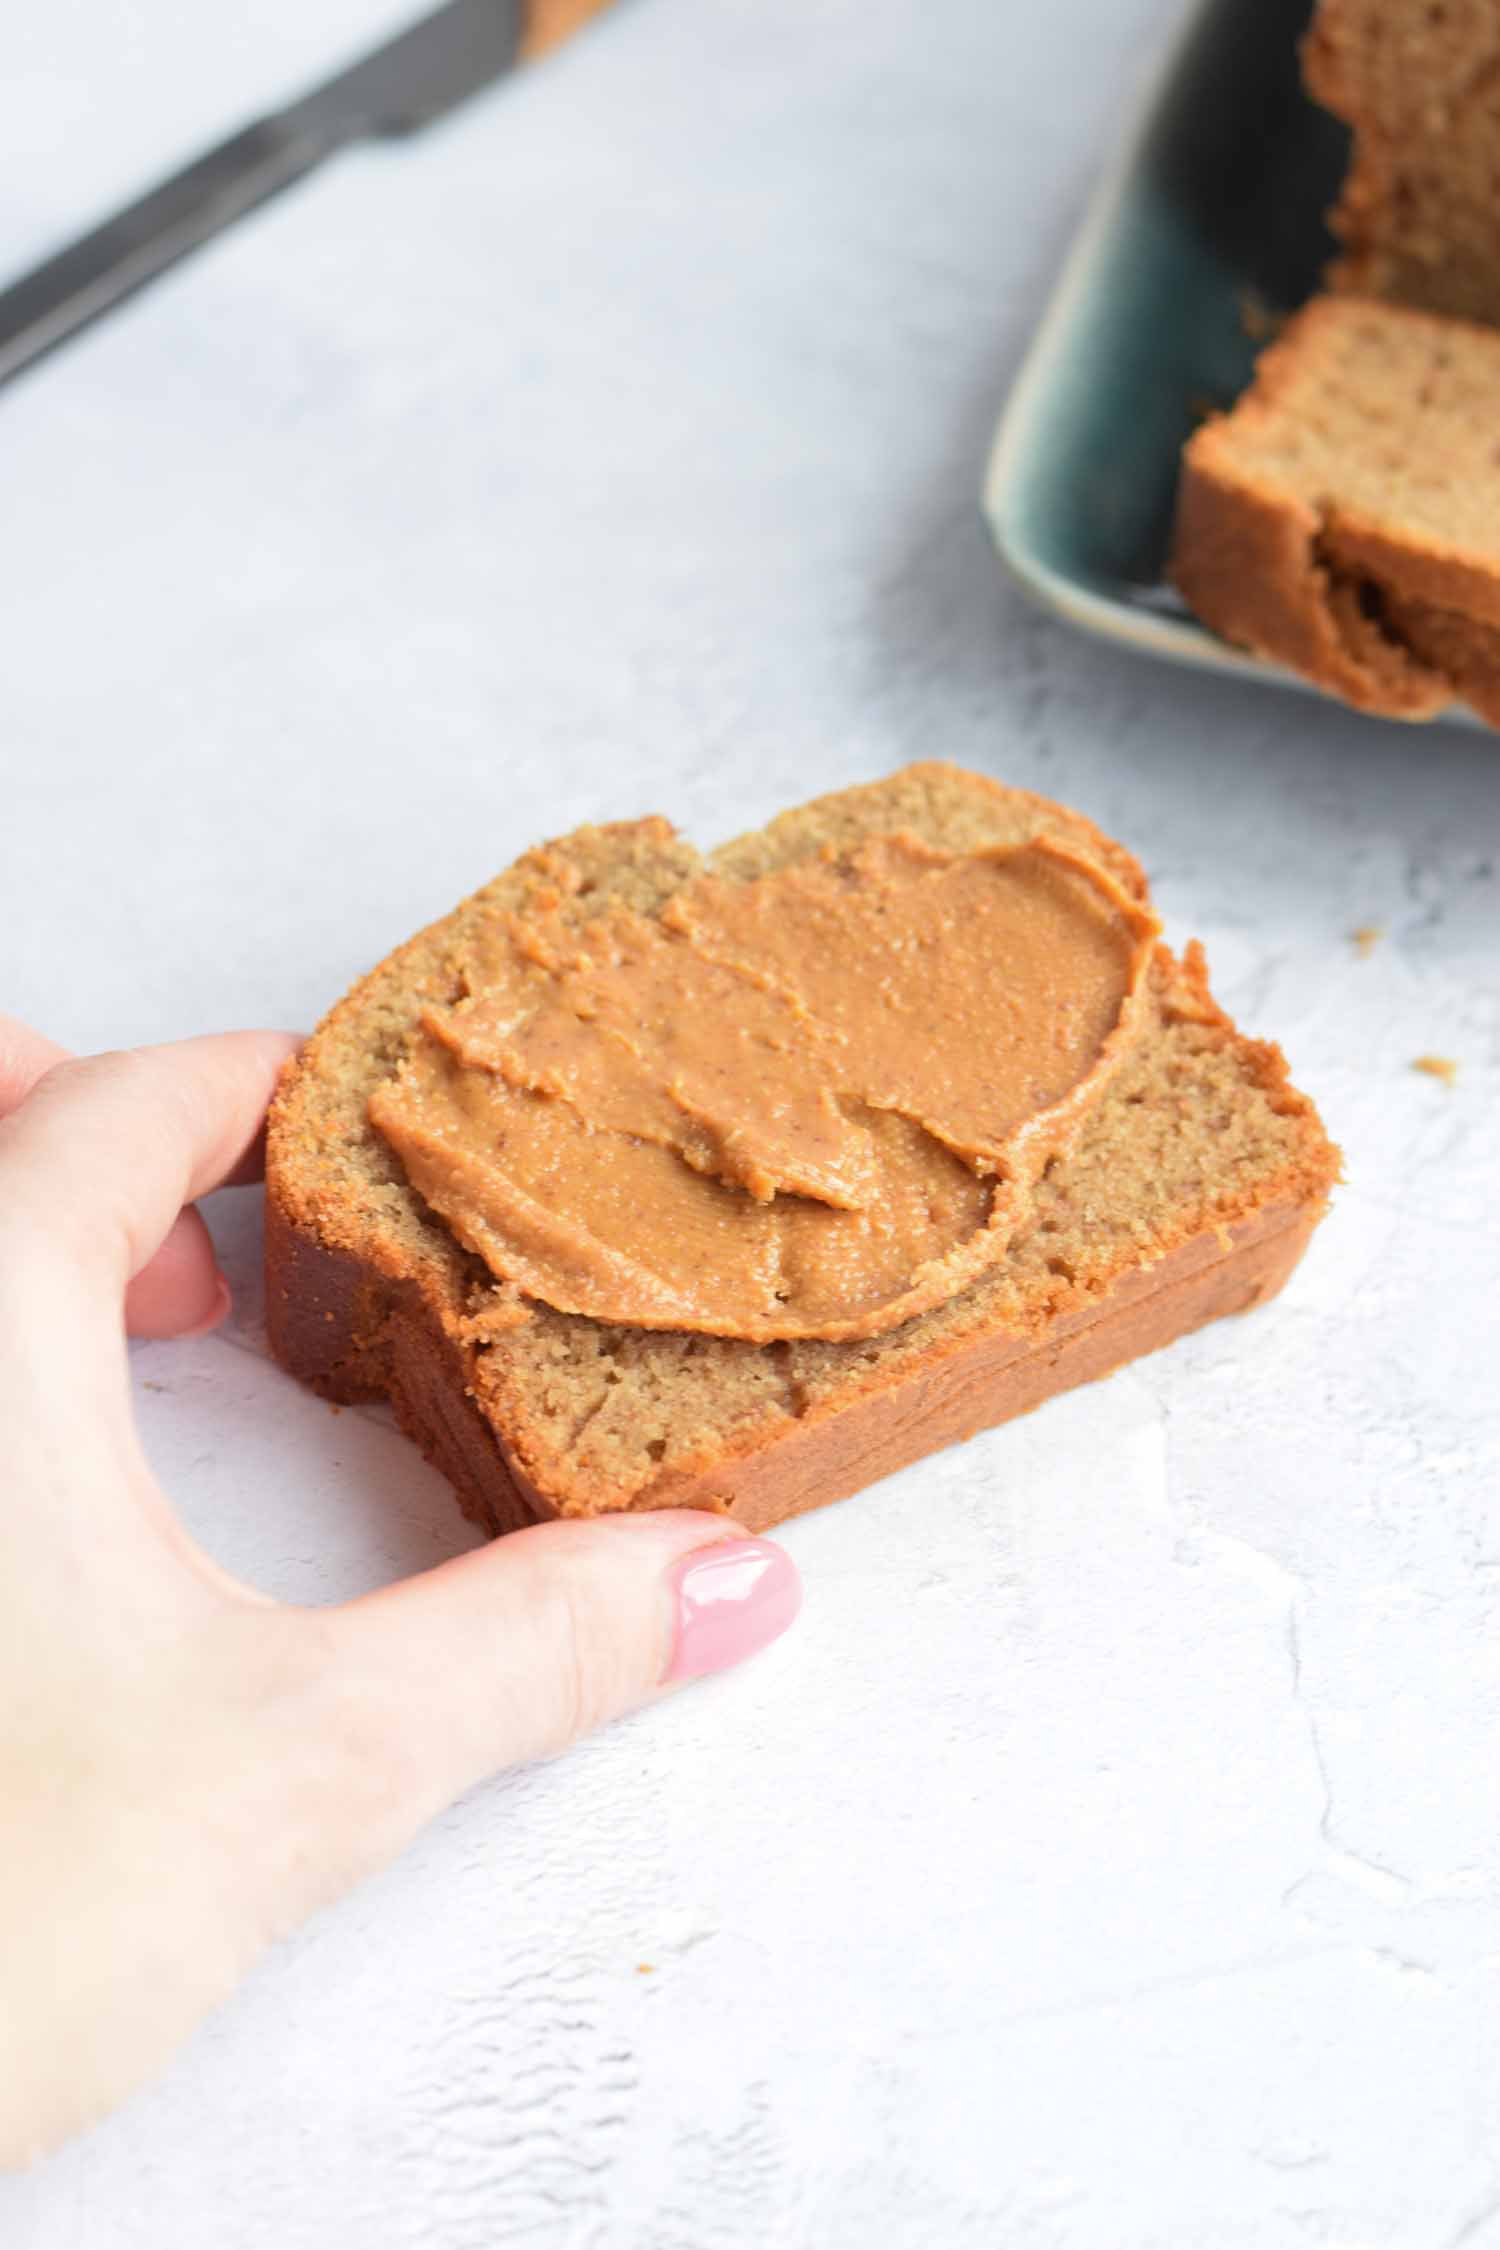 A hand holding a slice of banana bread with peanut butter